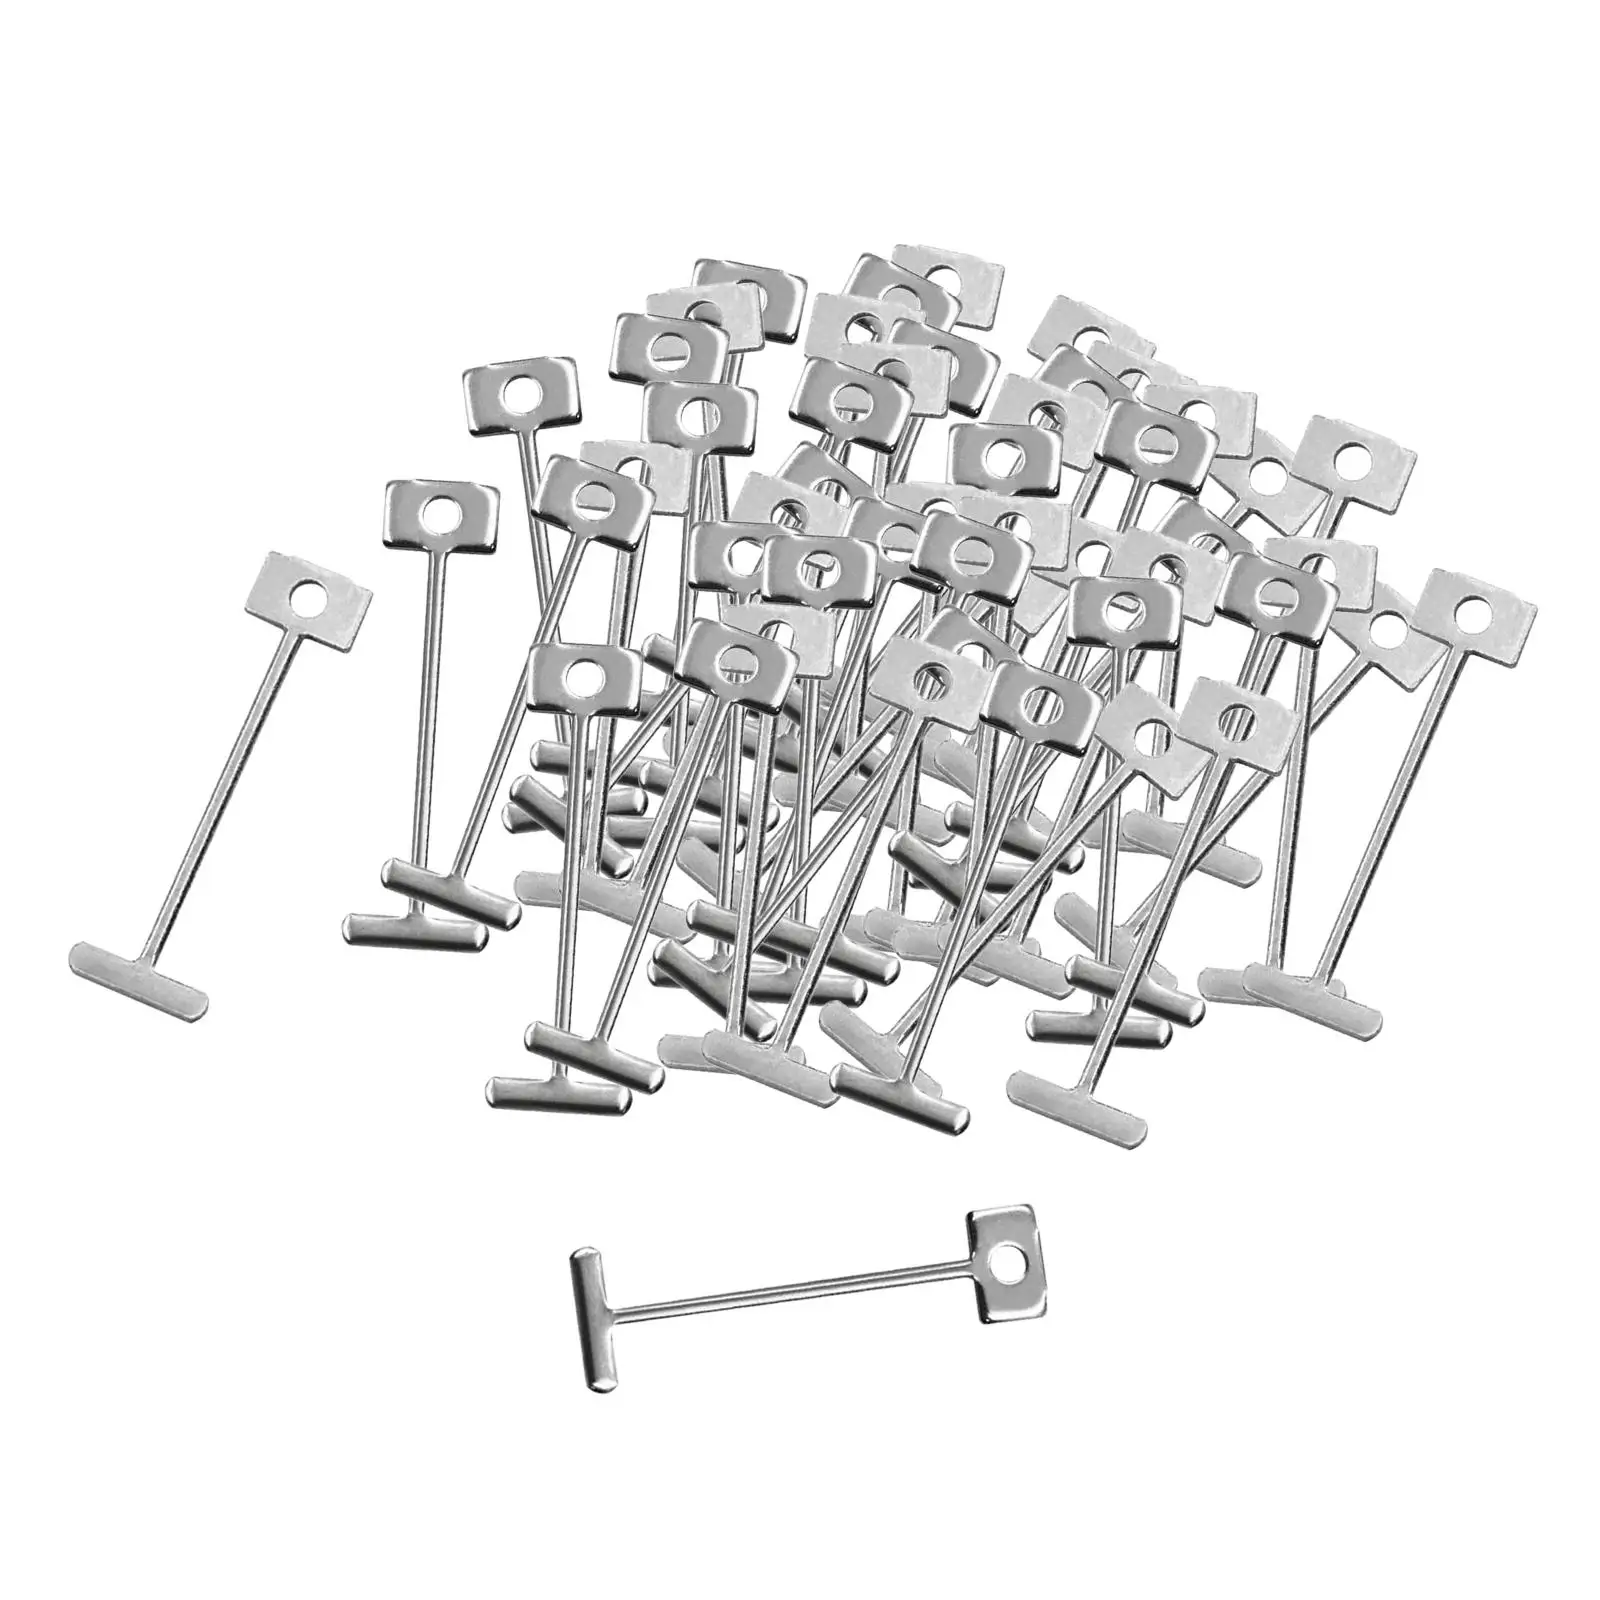 50 Pieces 1.5mm T Pins Clip Positioning Positioning Artifact